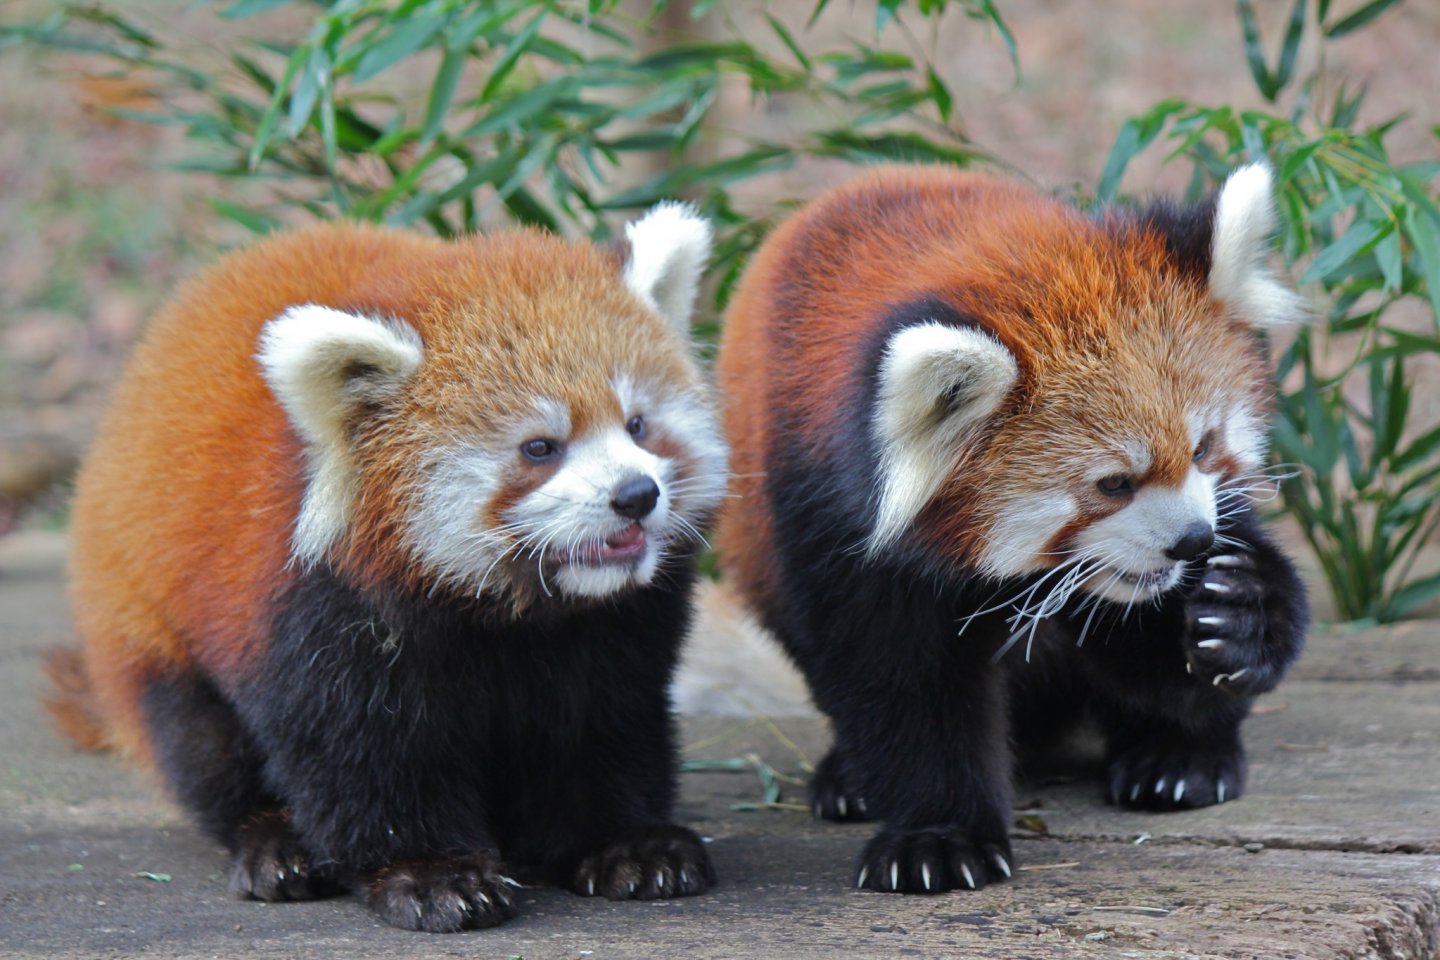 Meet two of the Red Panda's Meimei and Meita